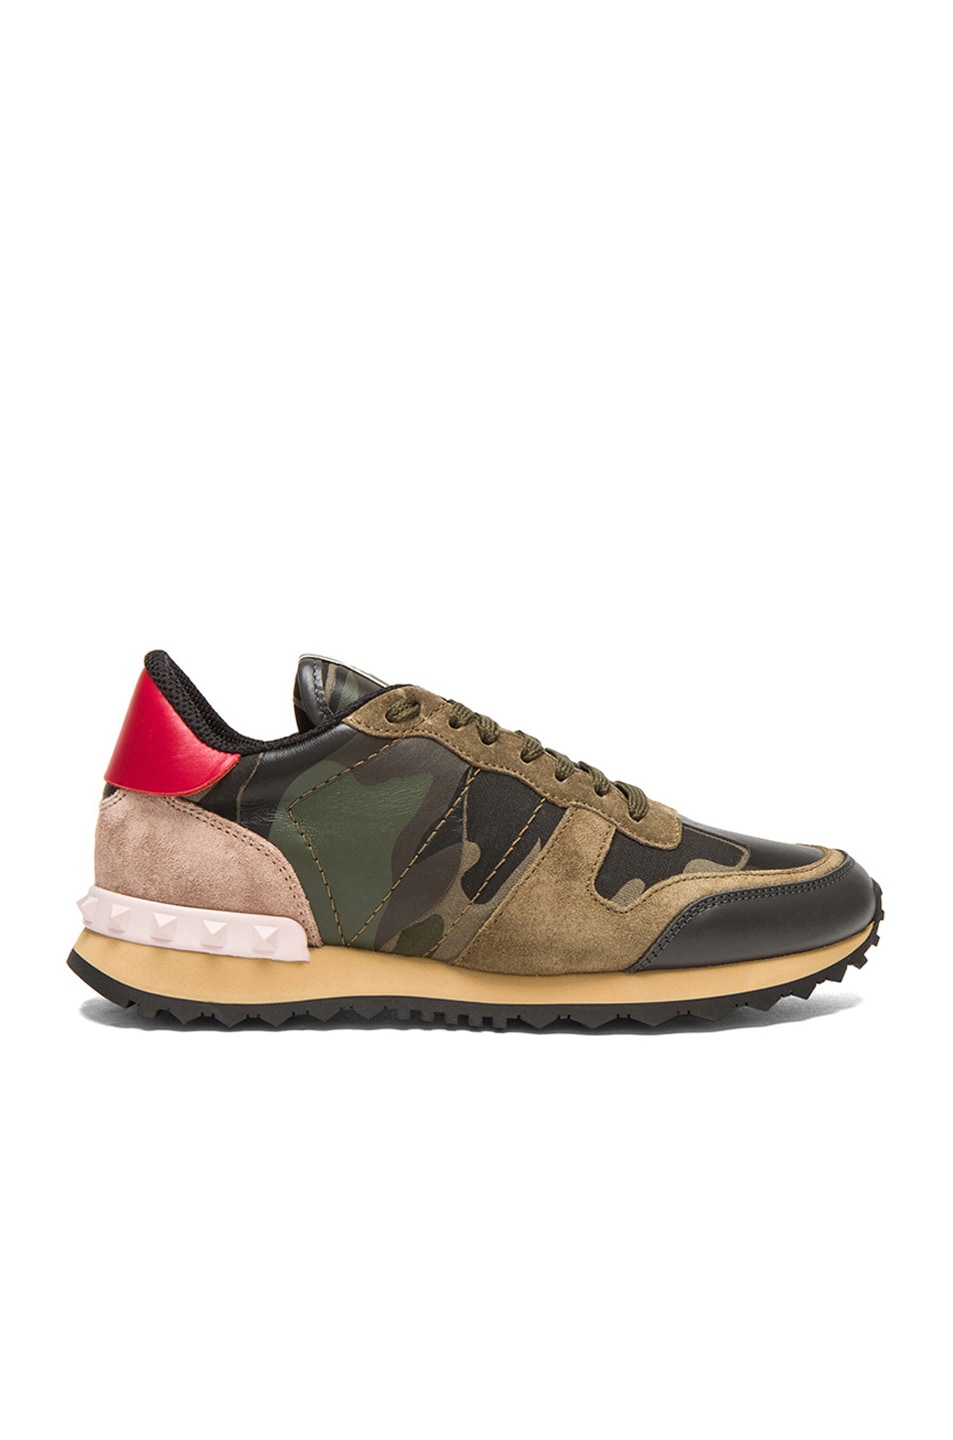 Image 1 of Valentino Garavani Camouflage Canvas & Suede Trainers in Army Green Camo